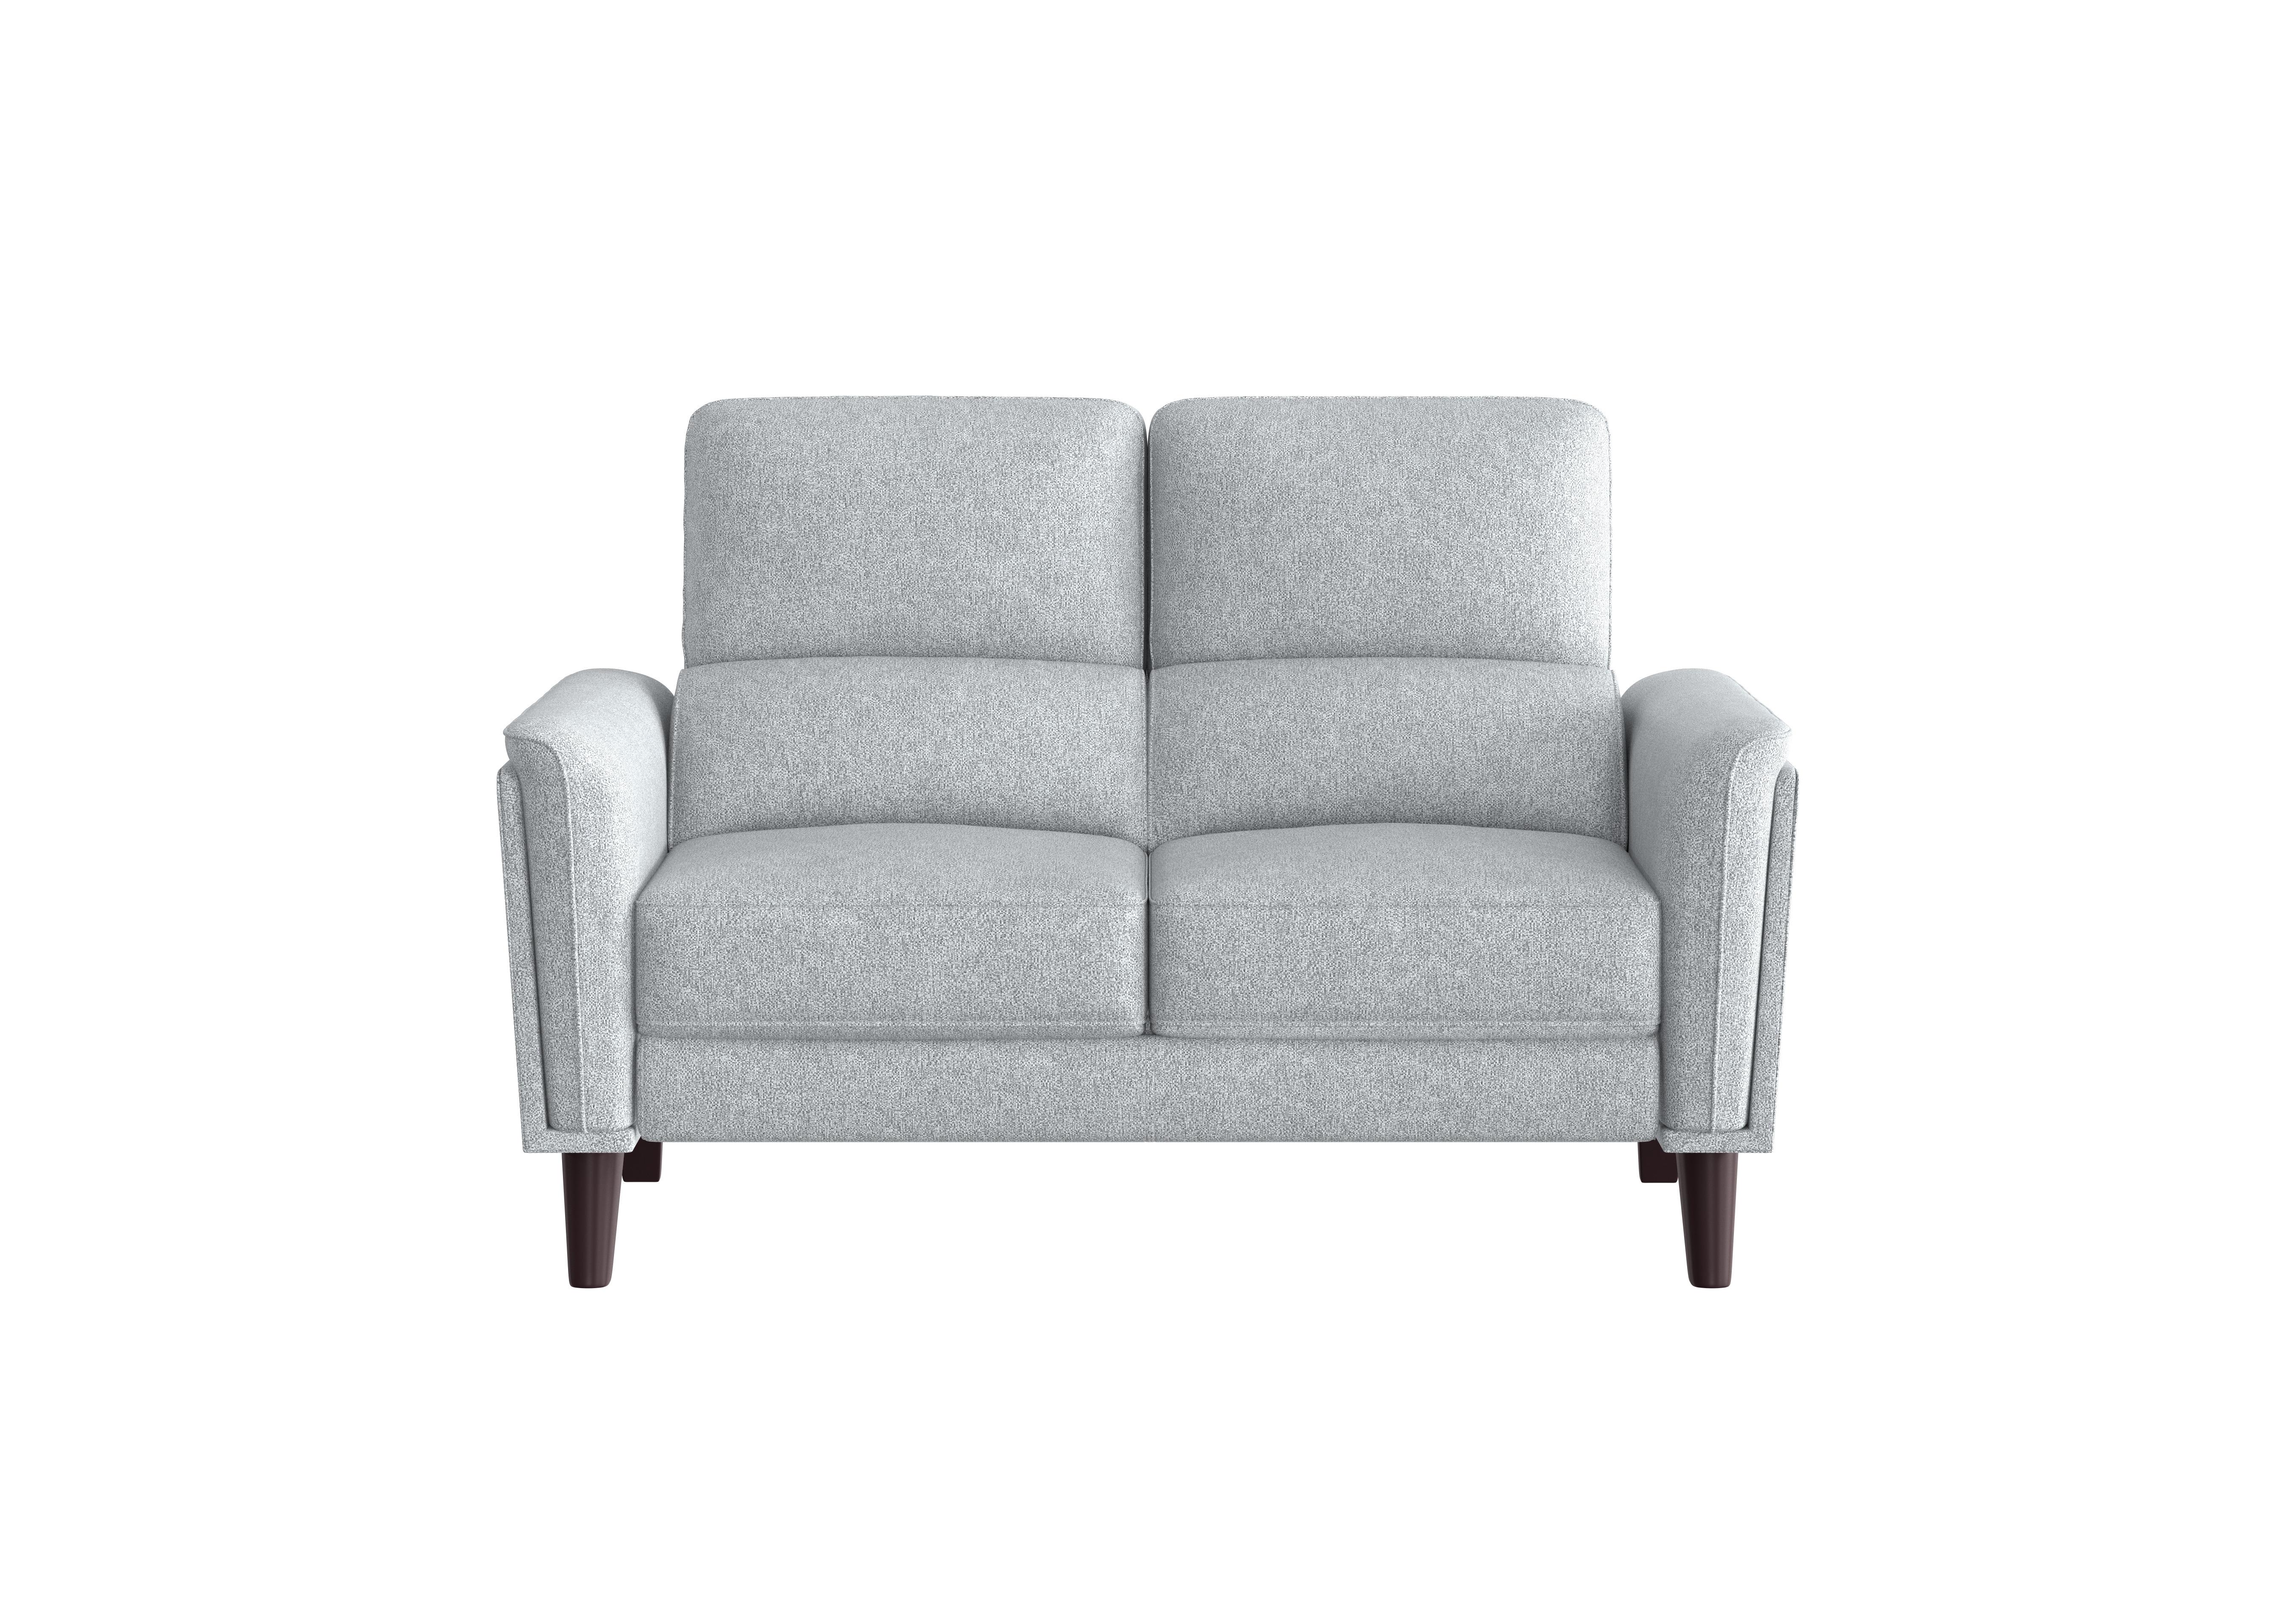 Compact Collection Klein 2 Seater Fabric Sofa in Fab-Chl-R21 Frost on Furniture Village